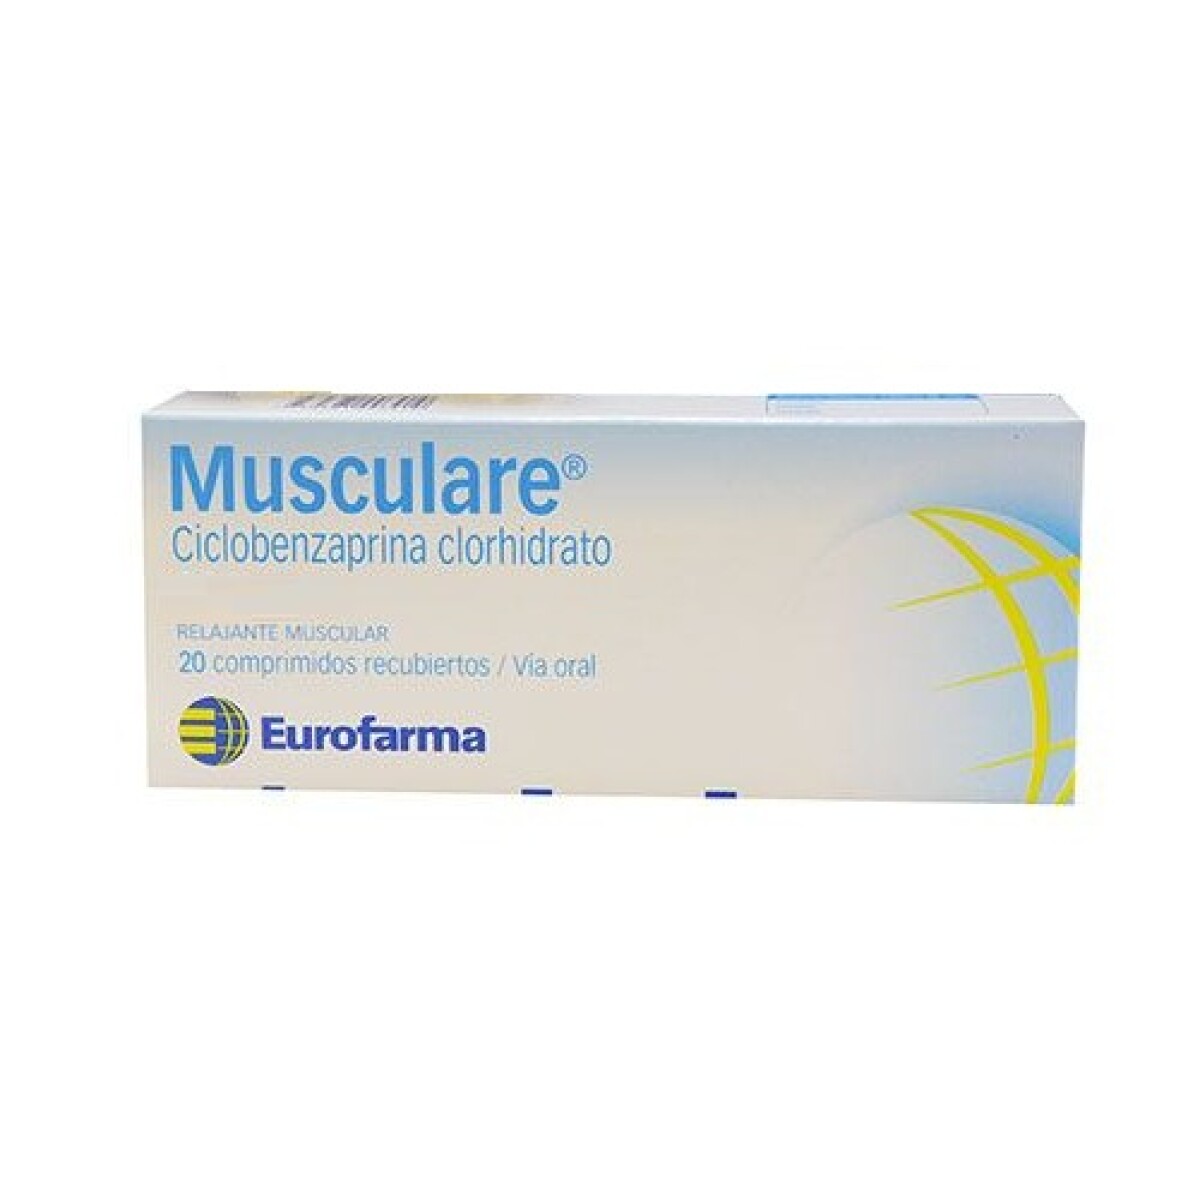 Musculare 5 Mg. 20 Comp. 